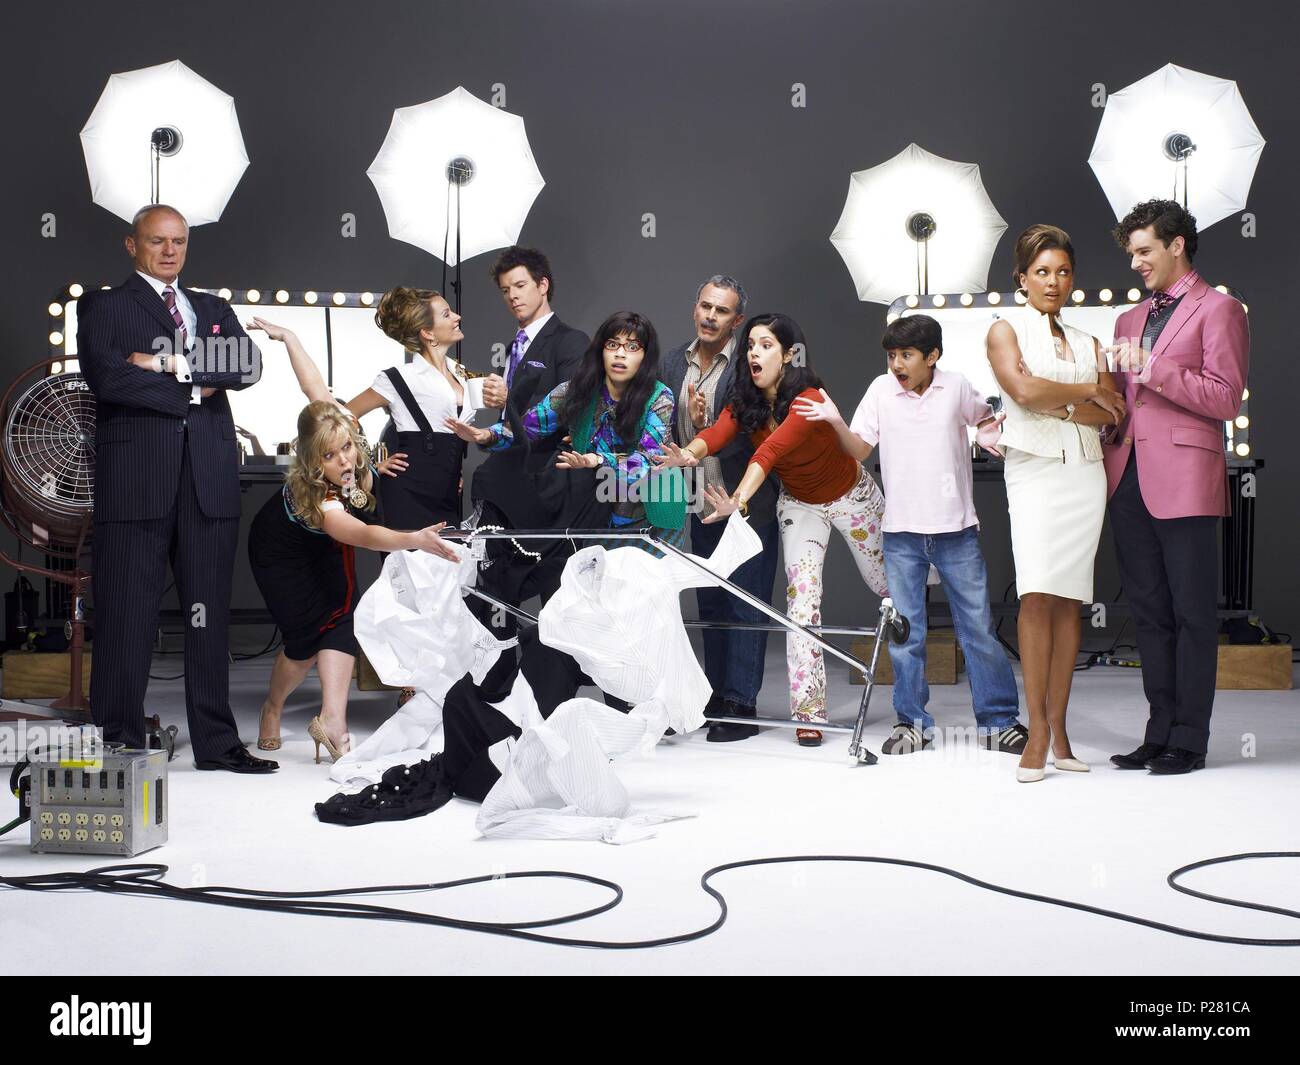 Original Film Title: UGLY BETTY.  English Title: UGLY BETTY.  Film Director: JAMES HAYMAN.  Year: 2006. Credit: TOUCHSTONE TELEVISION / Album Stock Photo